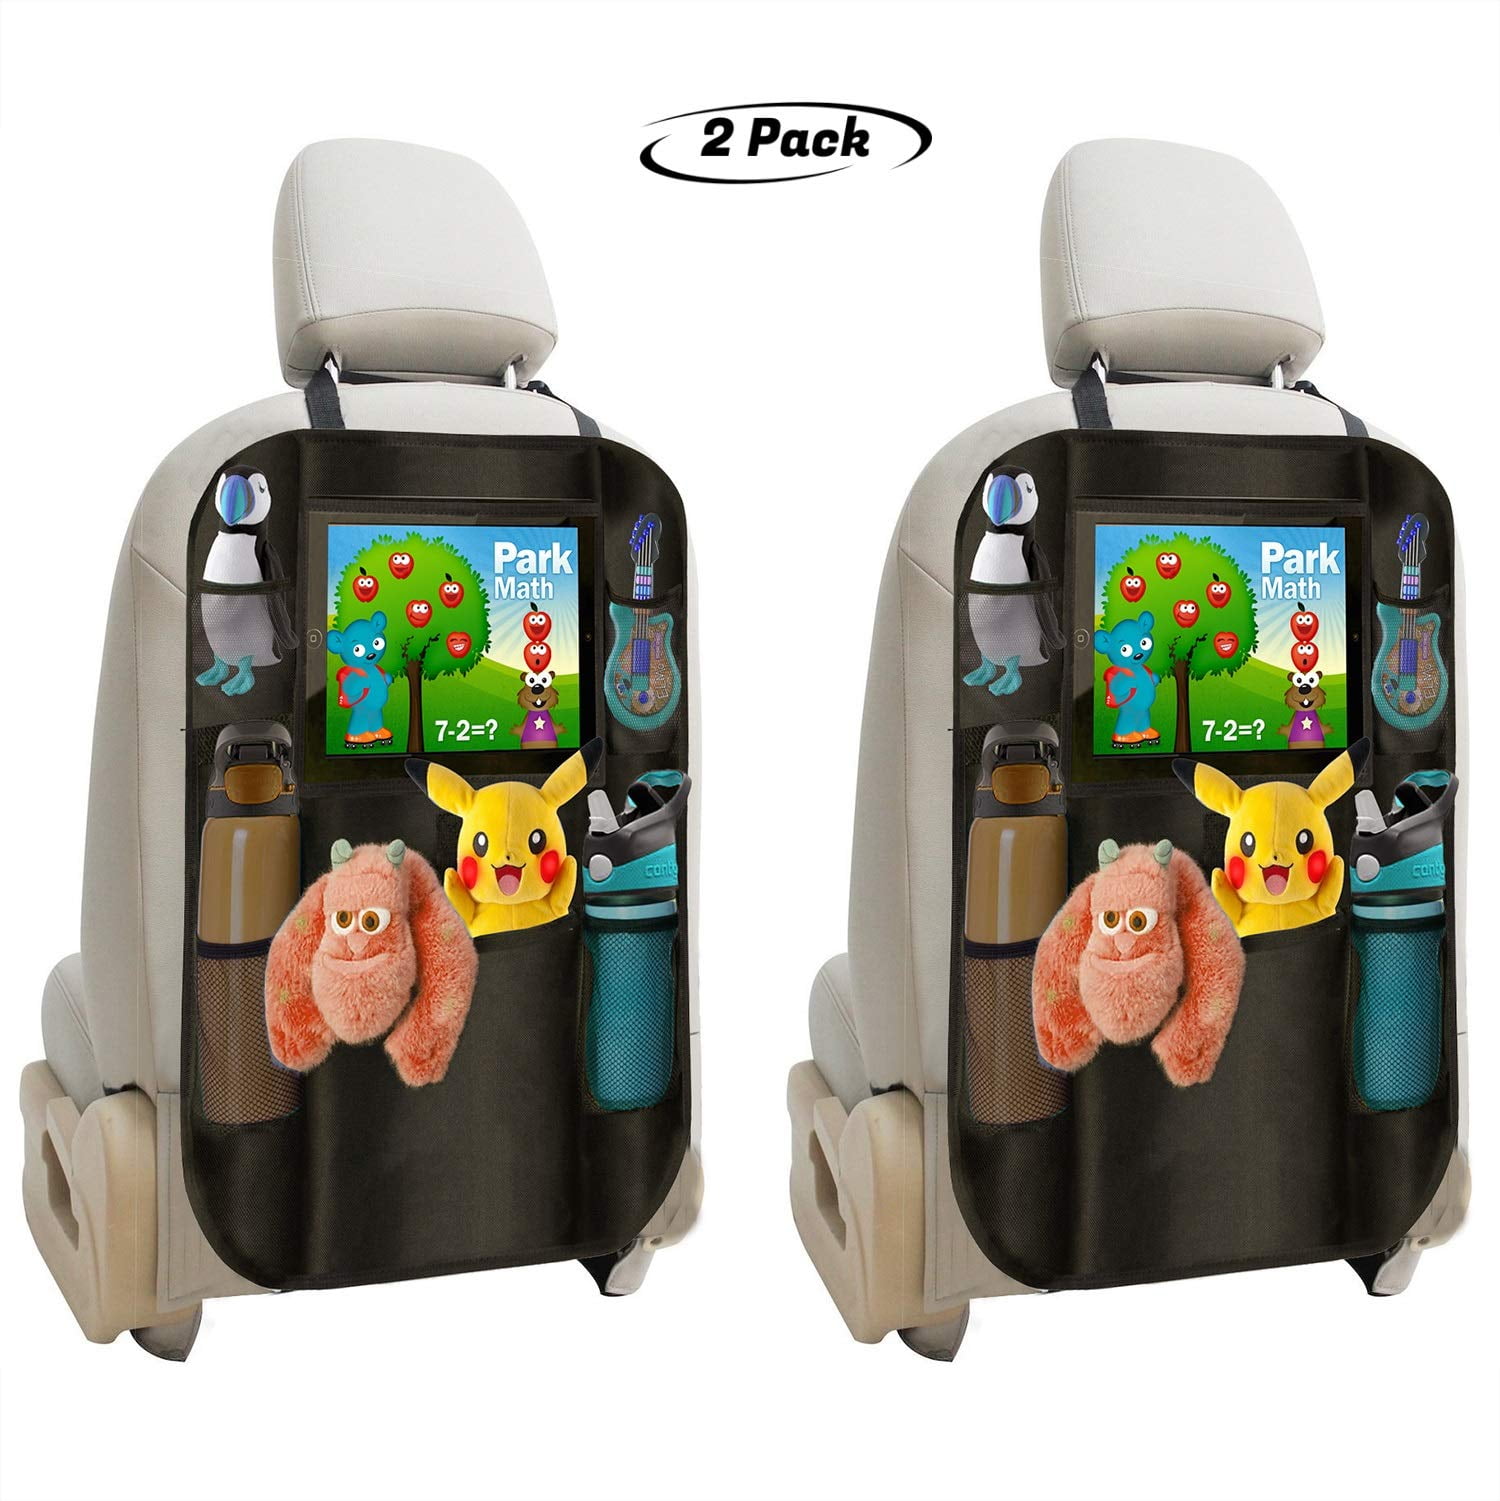 11 Storage Pockets for Toys Book Bottle Drink Backseat Car Organizer with 10 iPad Tablet Holder Auto Seat Back Protector Kick Mats Universal Fit Great Travel Accessories for Kids Black 2 Pack 